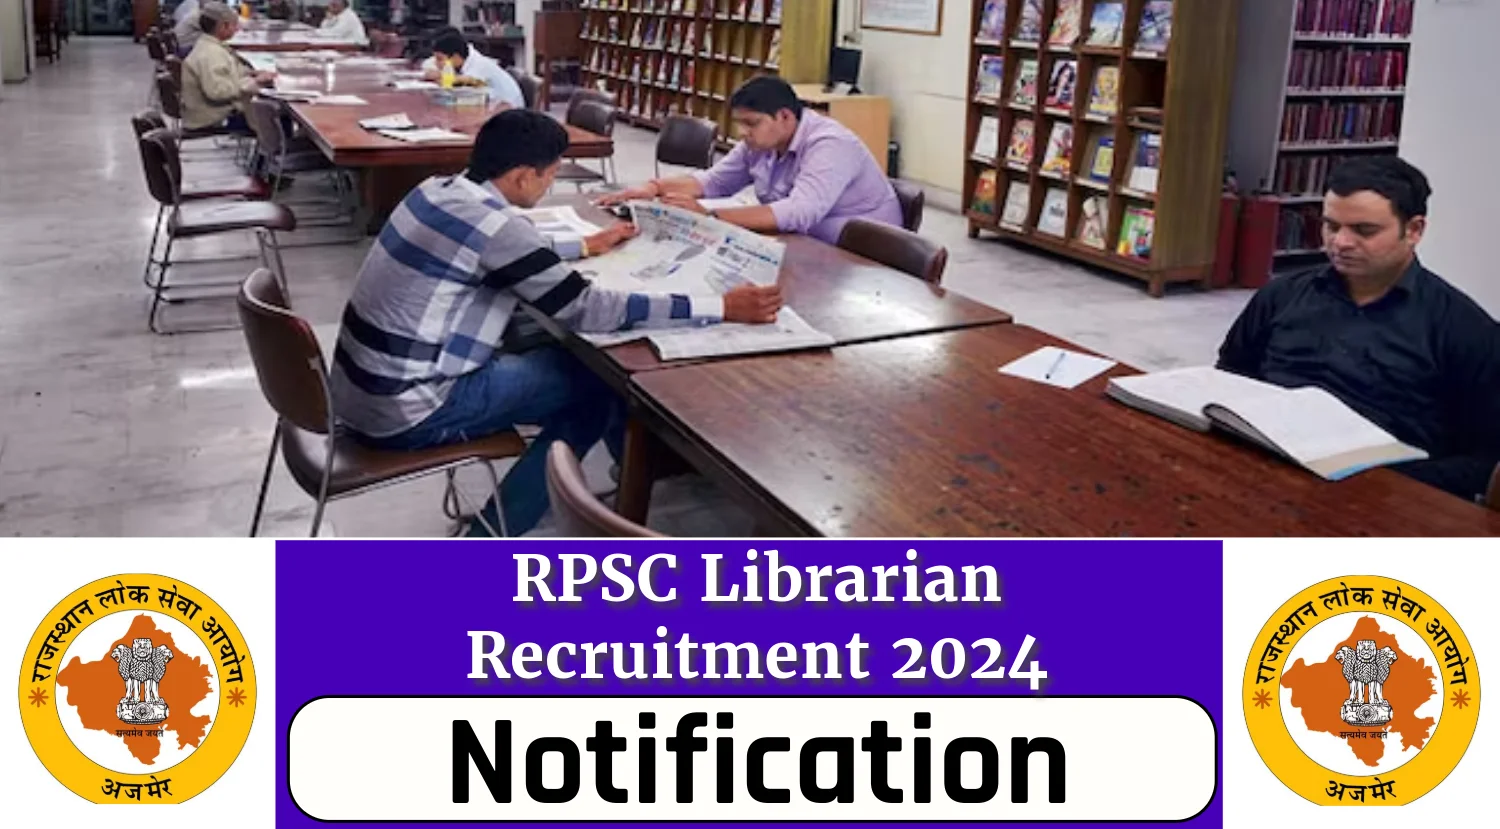 RPSC Librarian Recruitment 2024 Notification Out for 300 Vacancies, Check Eligibility, Syllabus, Exam Pattern and How to Apply